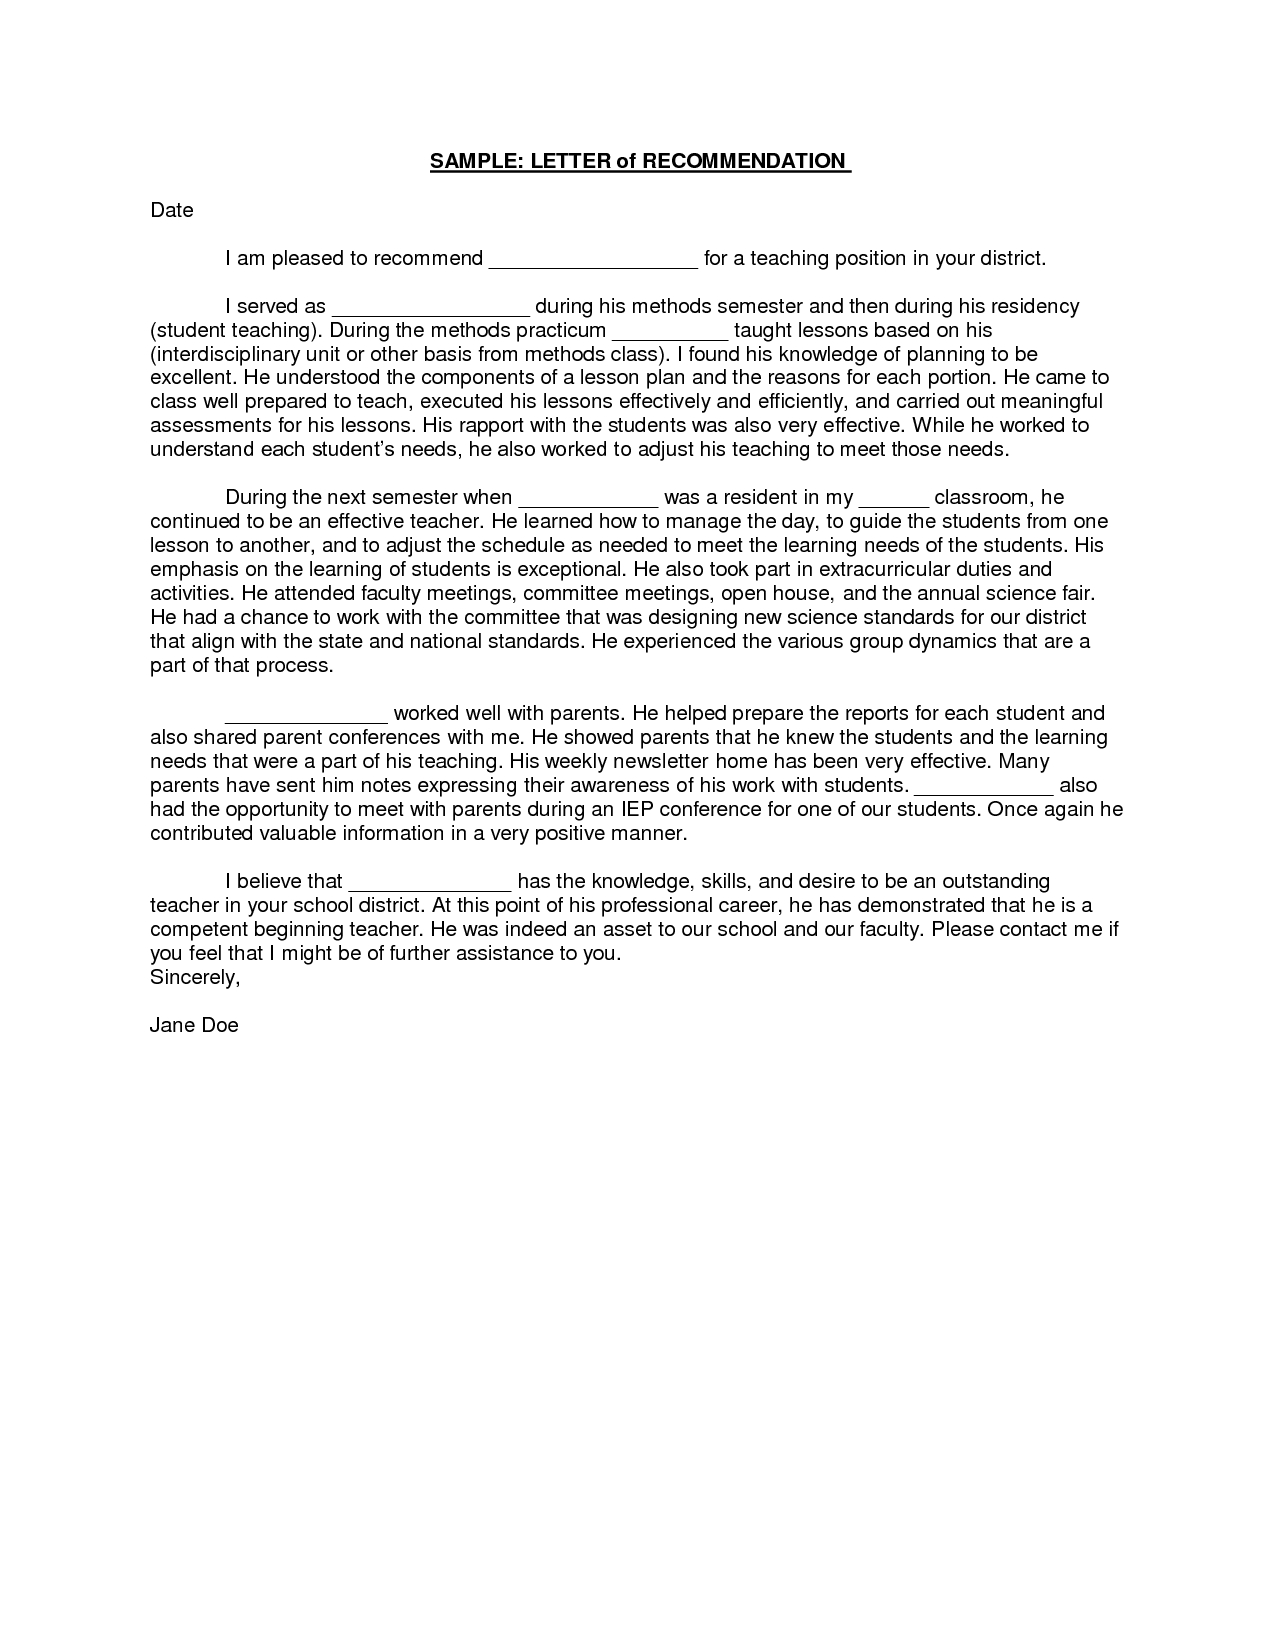 Teacher Recommendation Letter A Letter Of Recommendation intended for sizing 1275 X 1650